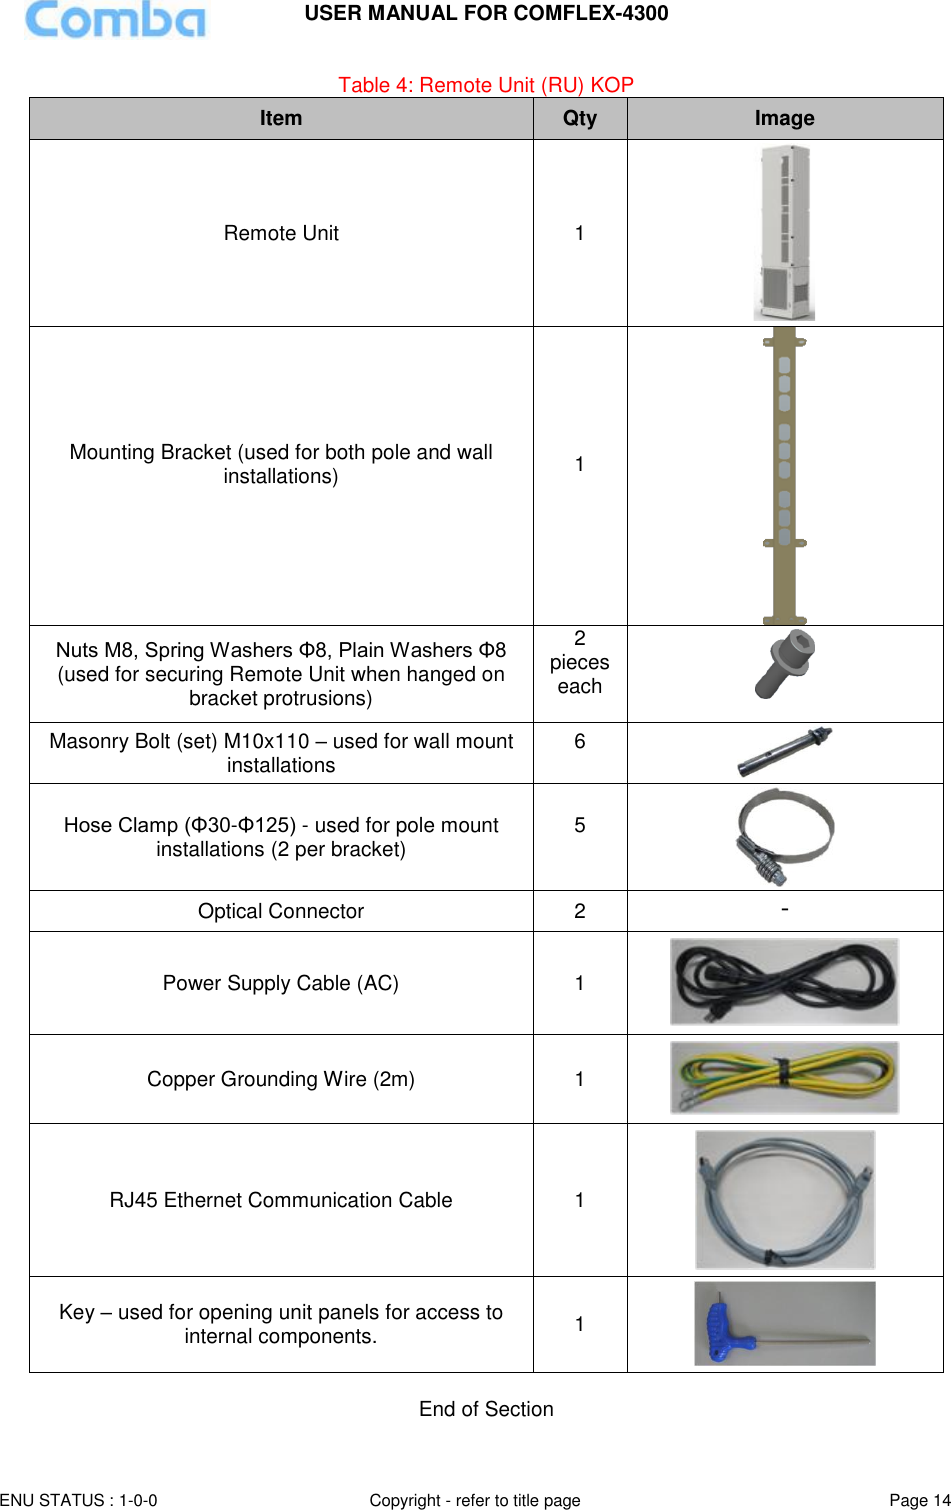 USER MANUAL FOR COMFLEX-4300 ENU STATUS : 1-0-0 Copyright - refer to title page Page 14  Table 4: Remote Unit (RU) KOP Item Qty Image Remote Unit 1  Mounting Bracket (used for both pole and wall installations)  1   Nuts M8, Spring Washers Φ8, Plain Washers Φ8 (used for securing Remote Unit when hanged on bracket protrusions) 2 pieces each   Masonry Bolt (set) M10x110 – used for wall mount installations 6   Hose Clamp (Φ30-Φ125) - used for pole mount installations (2 per bracket) 5   Optical Connector 2 - Power Supply Cable (AC) 1  Copper Grounding Wire (2m) 1  RJ45 Ethernet Communication Cable 1  Key – used for opening unit panels for access to internal components. 1   End of Section 